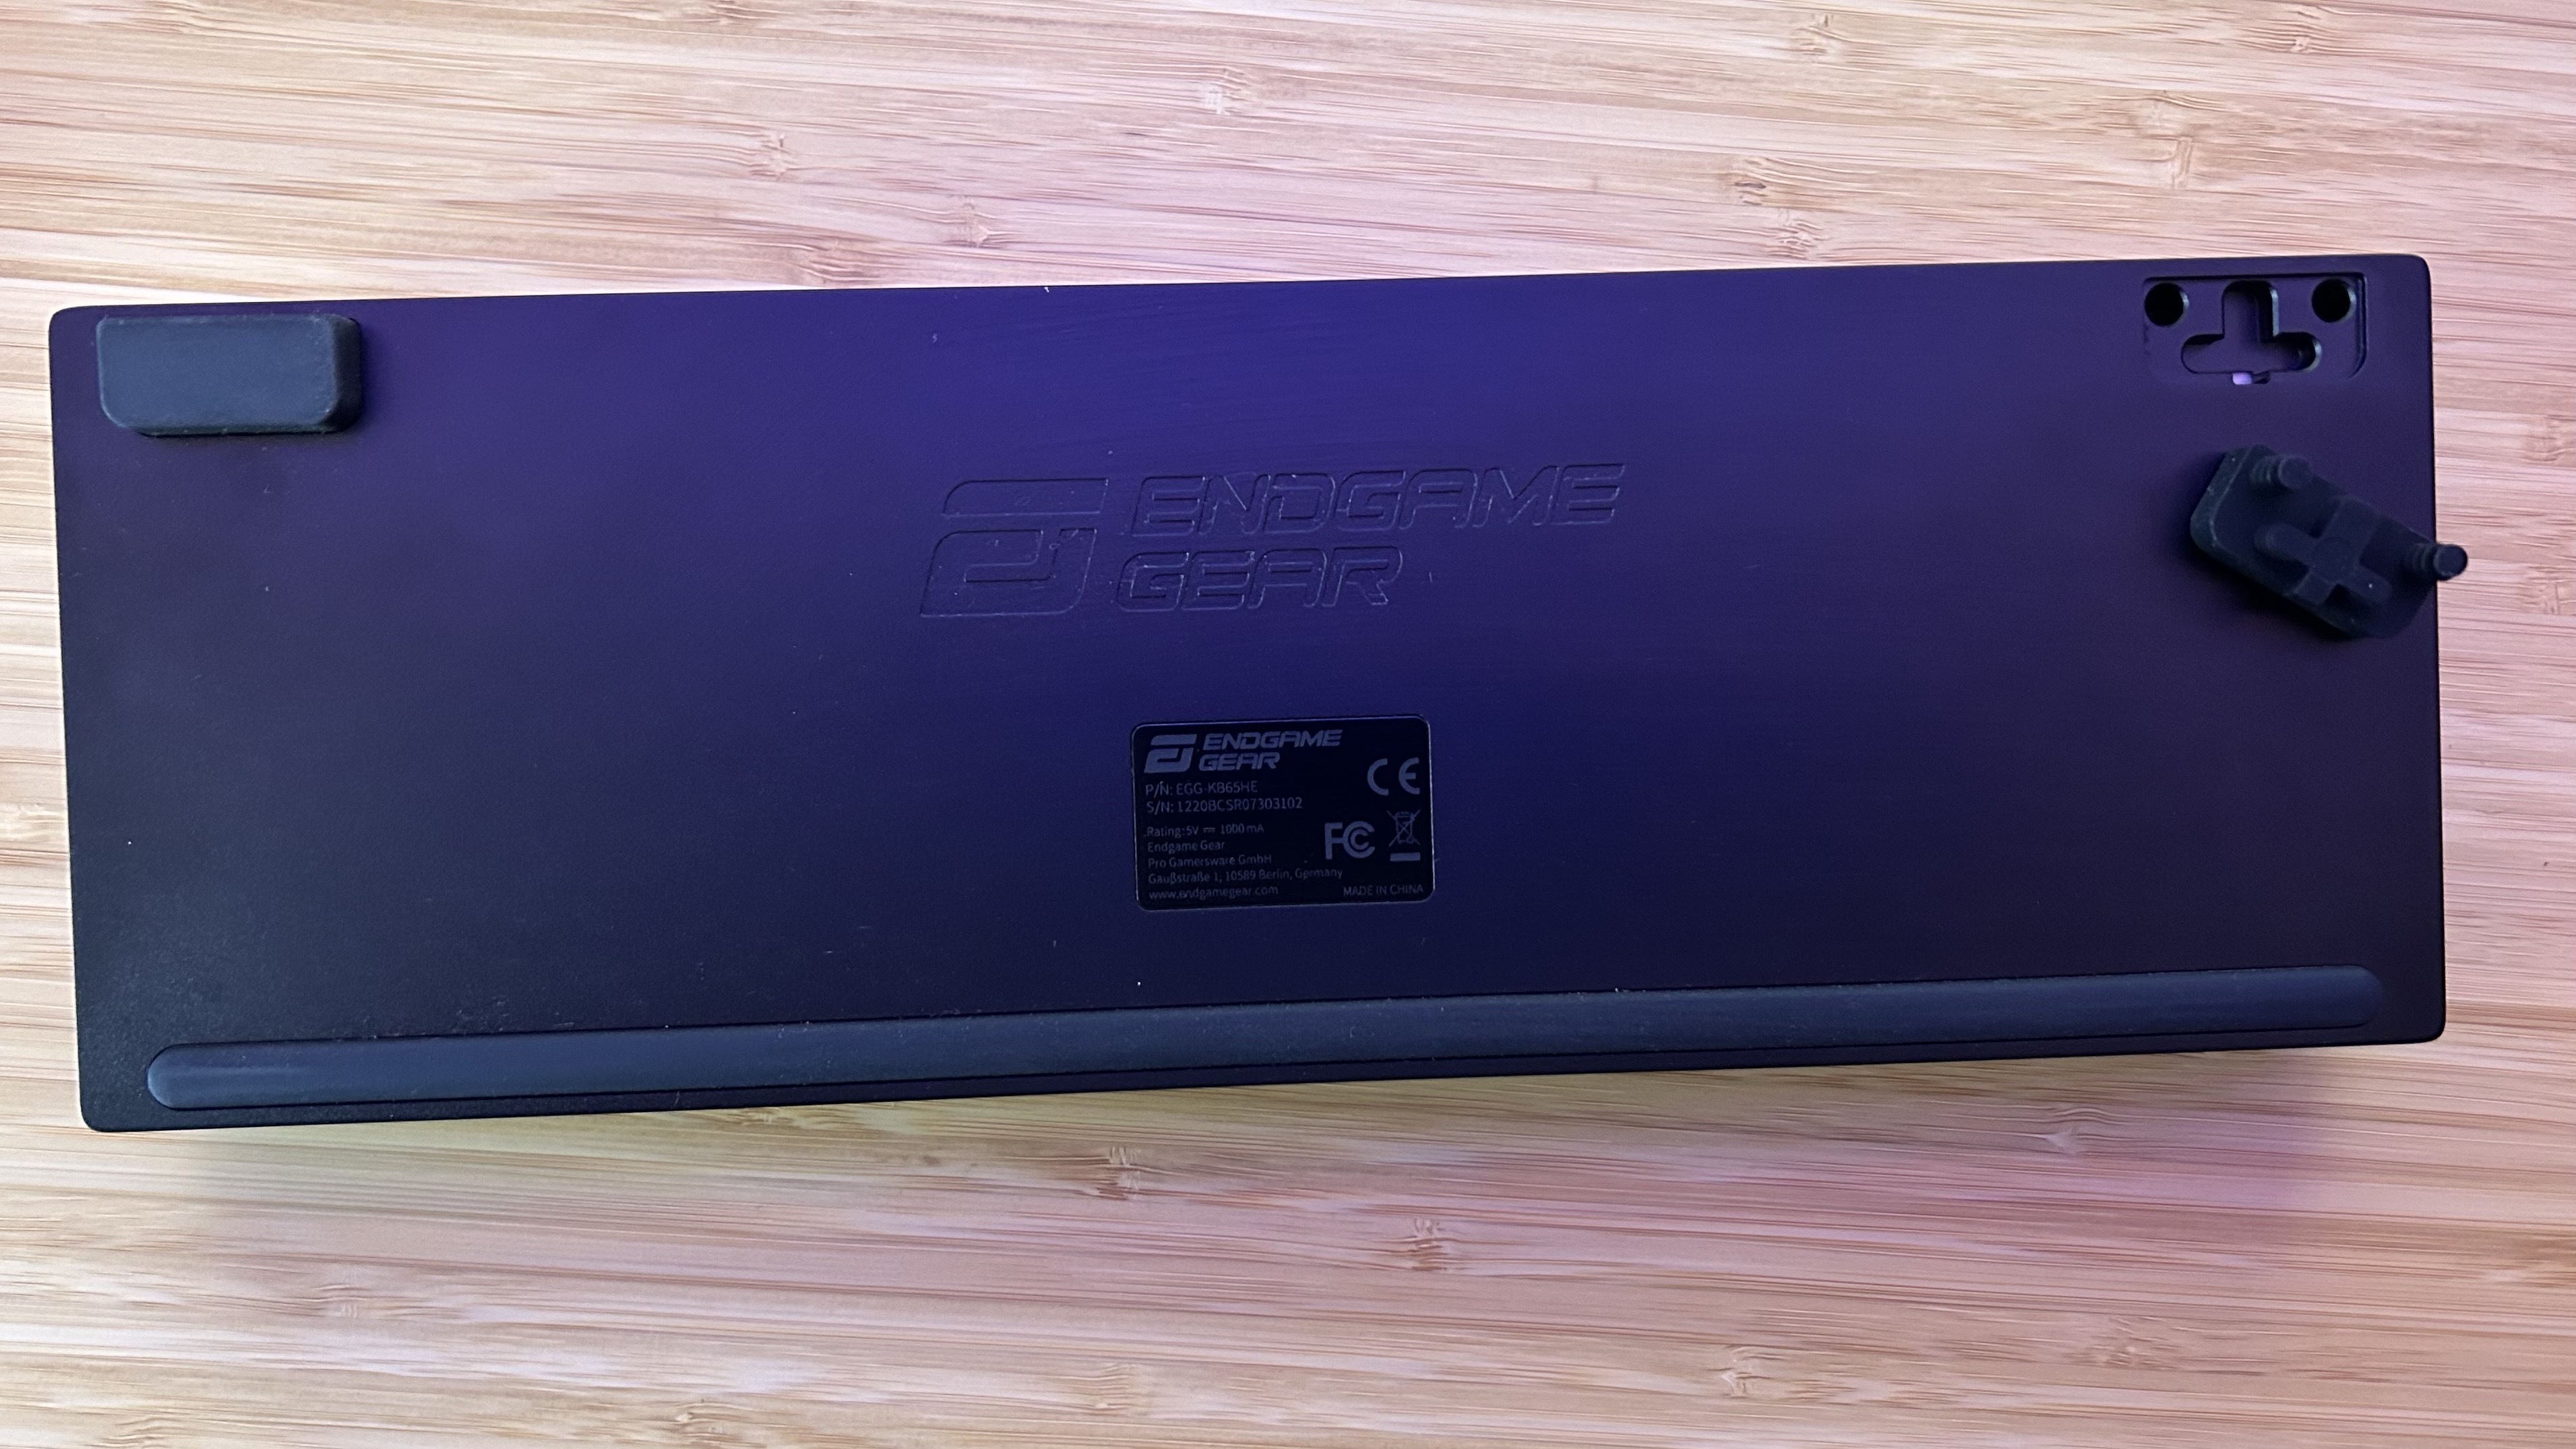 Back of Endgame Gear keyboard showing rubber feet with one removed